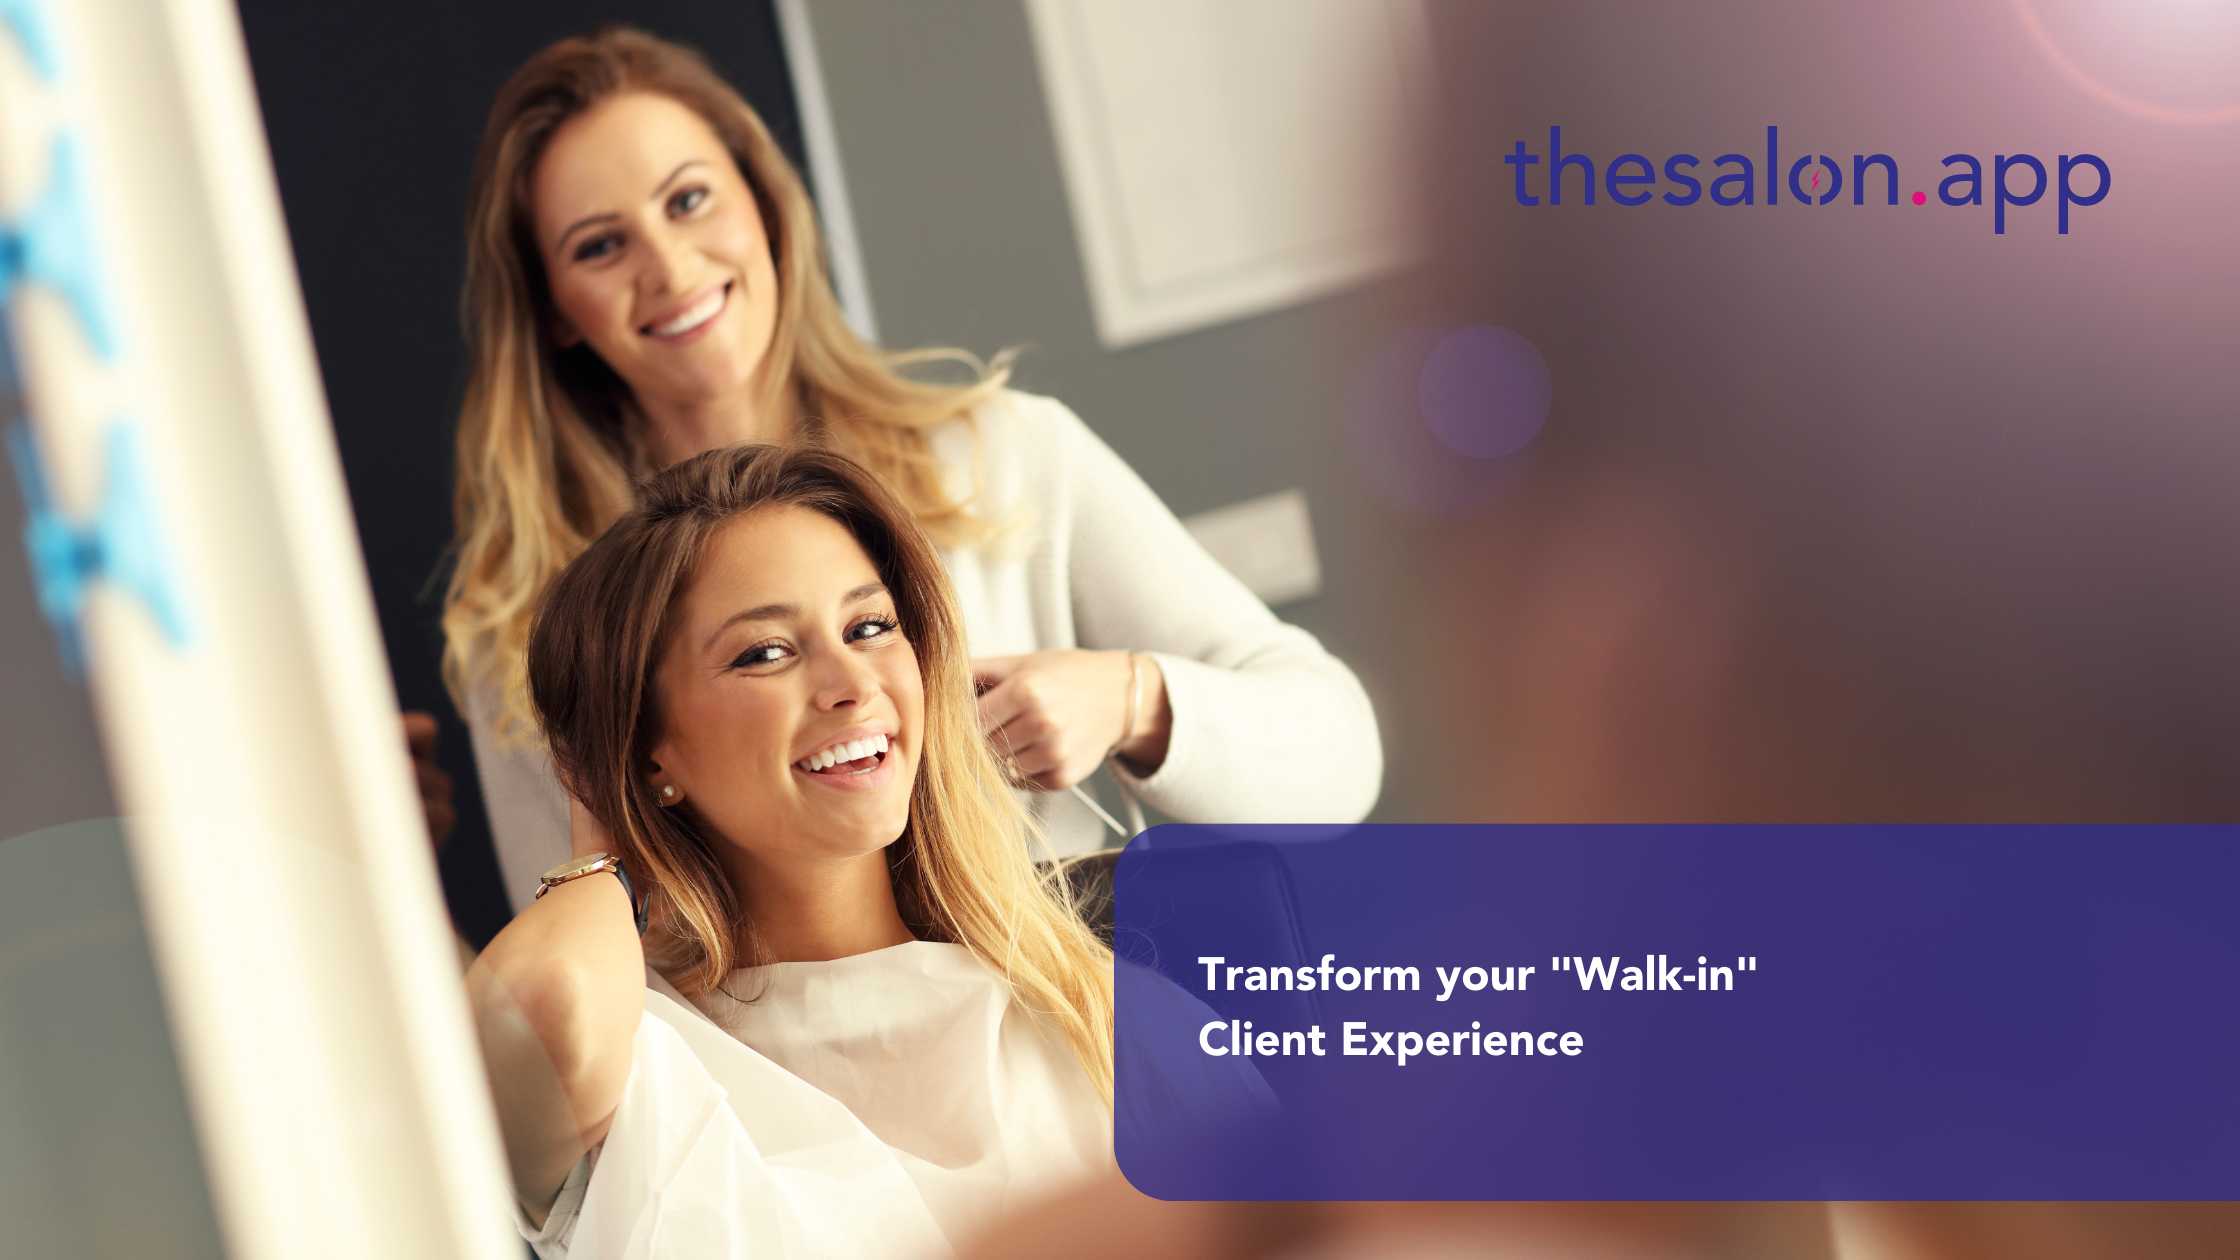 Transform your walk-in client experience